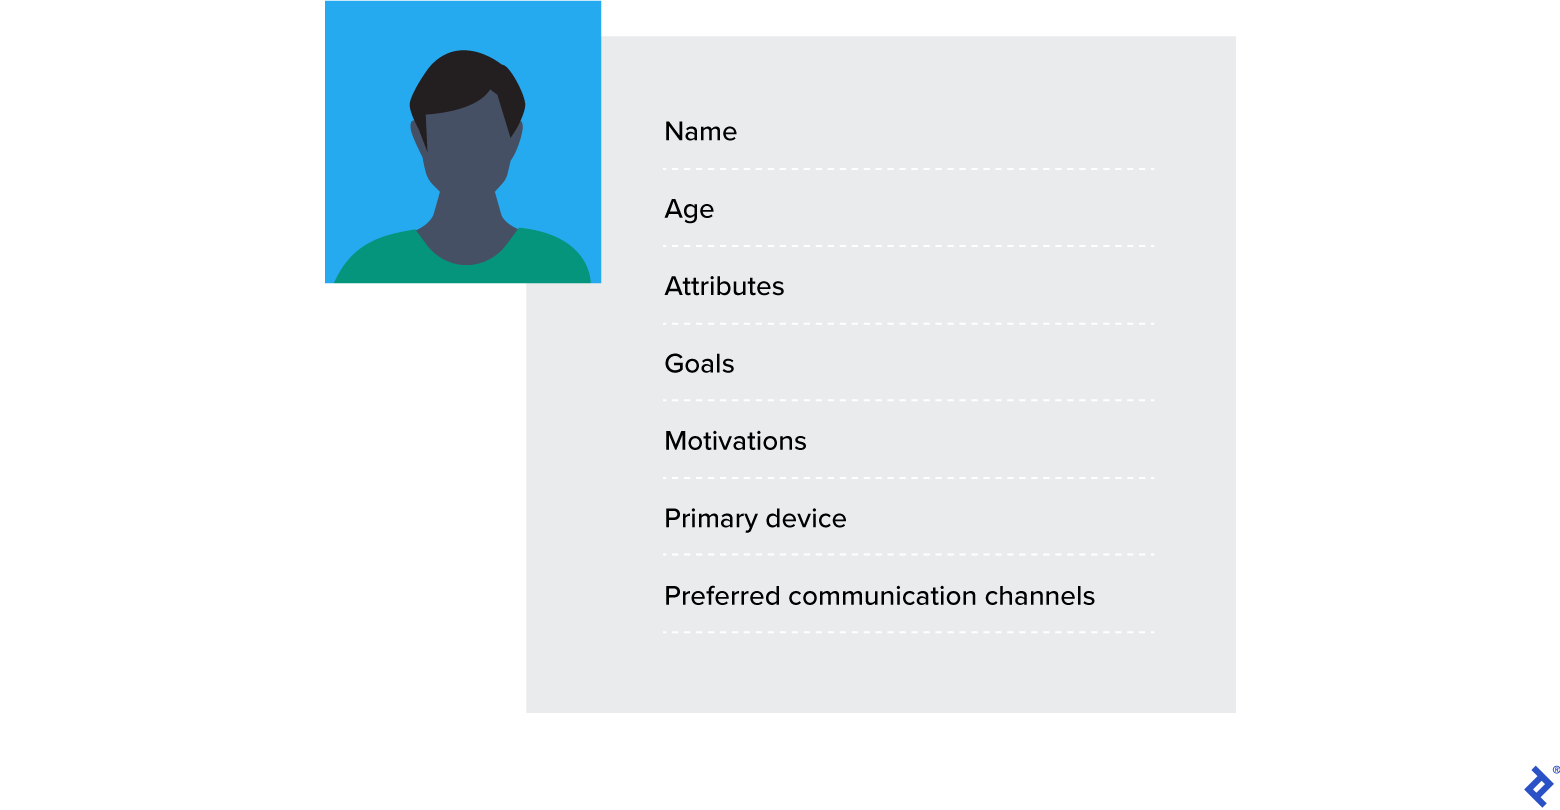 User personas include the target user’s traits, such as attributes, goals, and preferred communication channels.